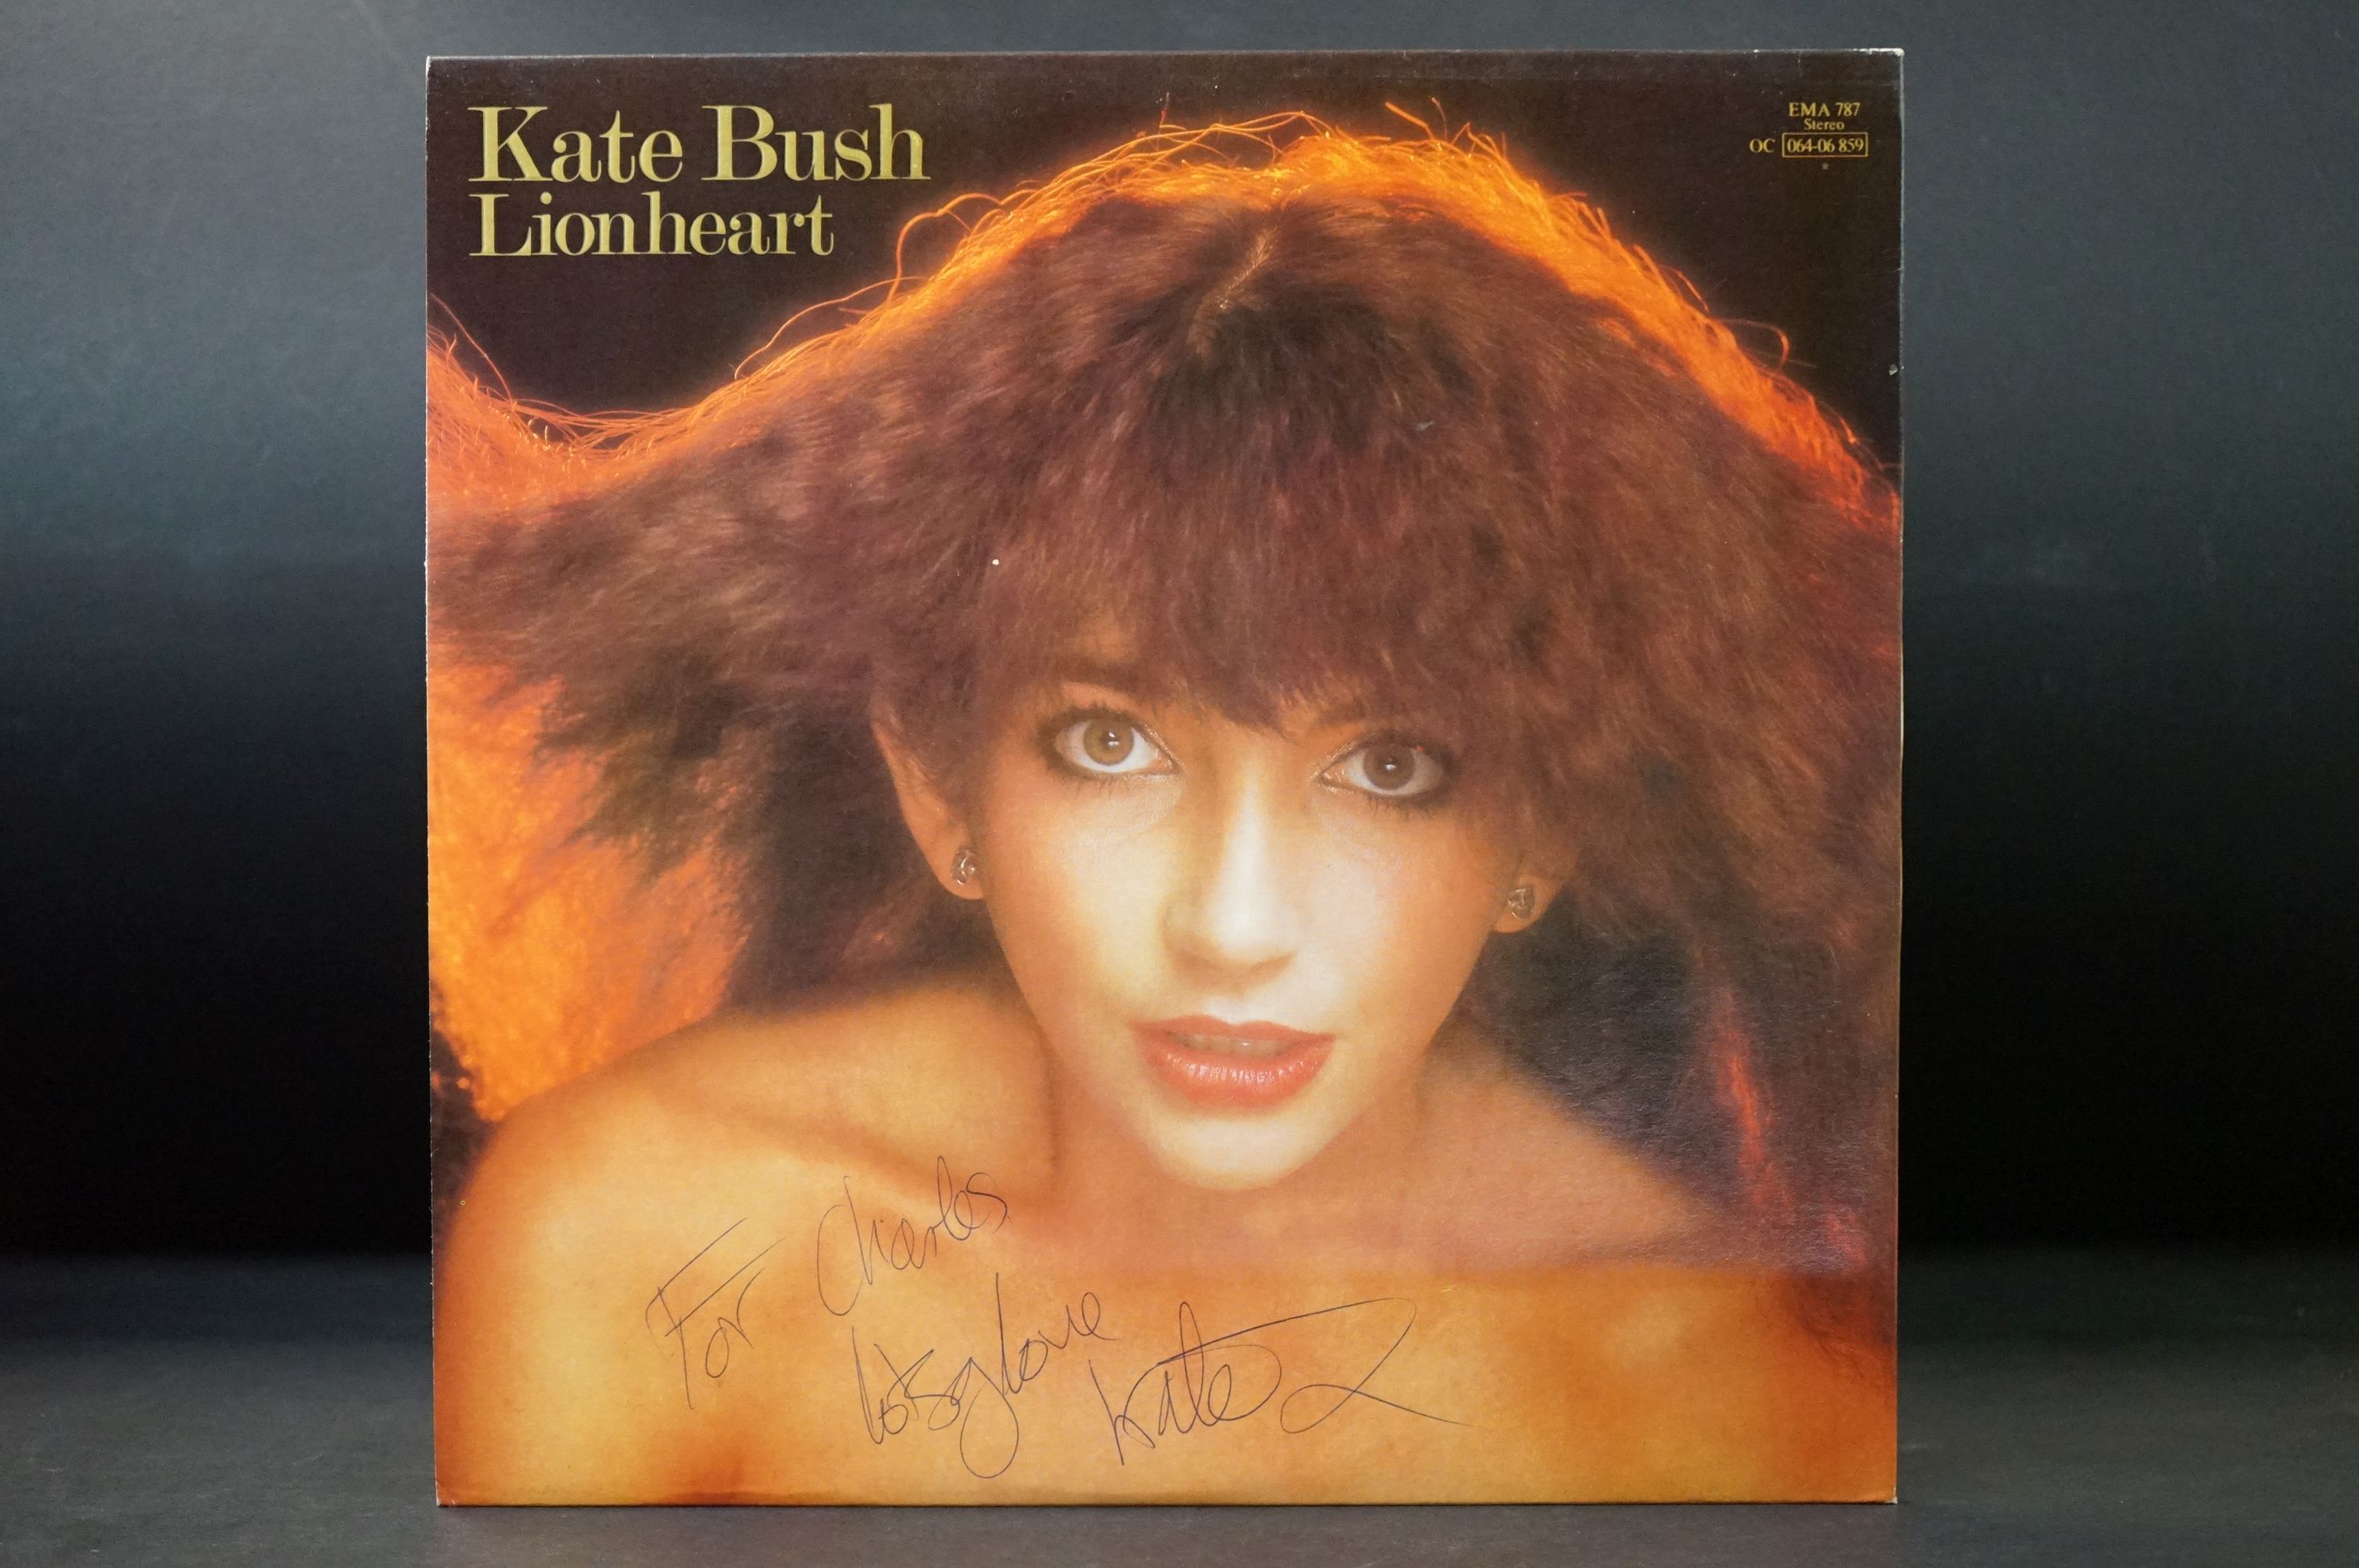 Vinyl & Autograph - Kate Bush Lionheart LP signed to rear 'For Charles lots of love Kate x'